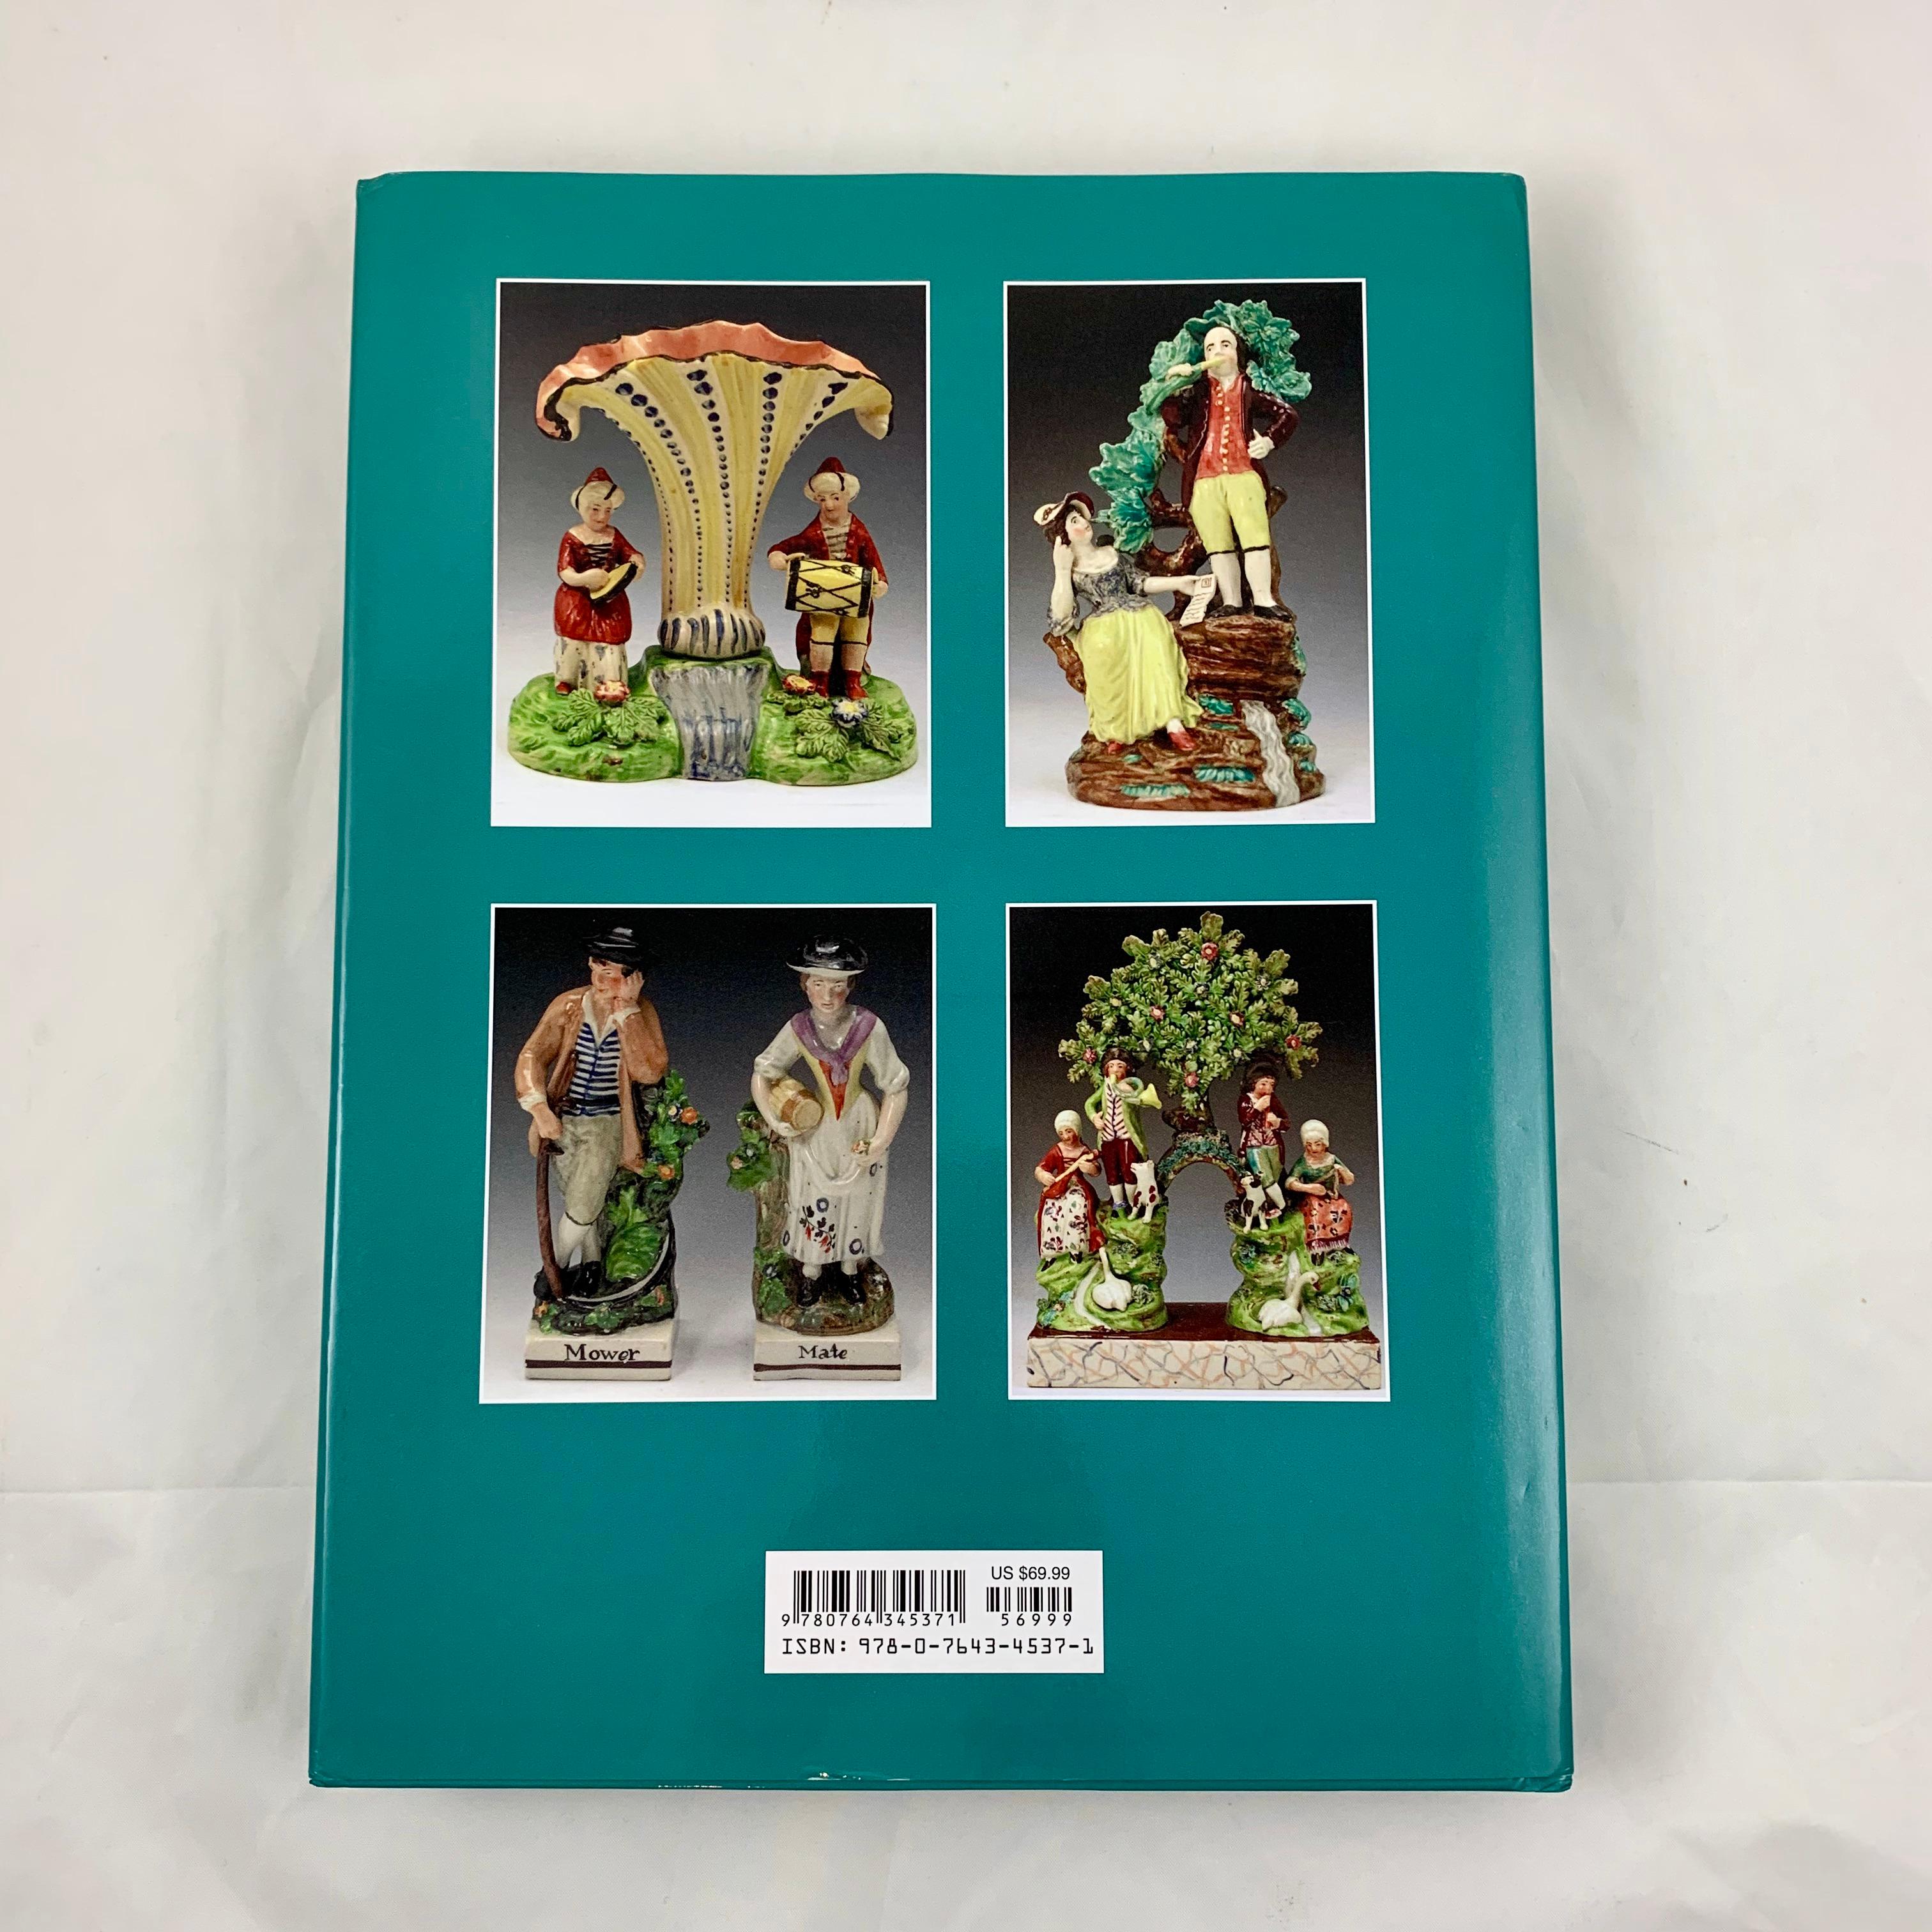 International Style Staffordshire Figures 1780-1840, Volume 1 Reference and Collectors Book